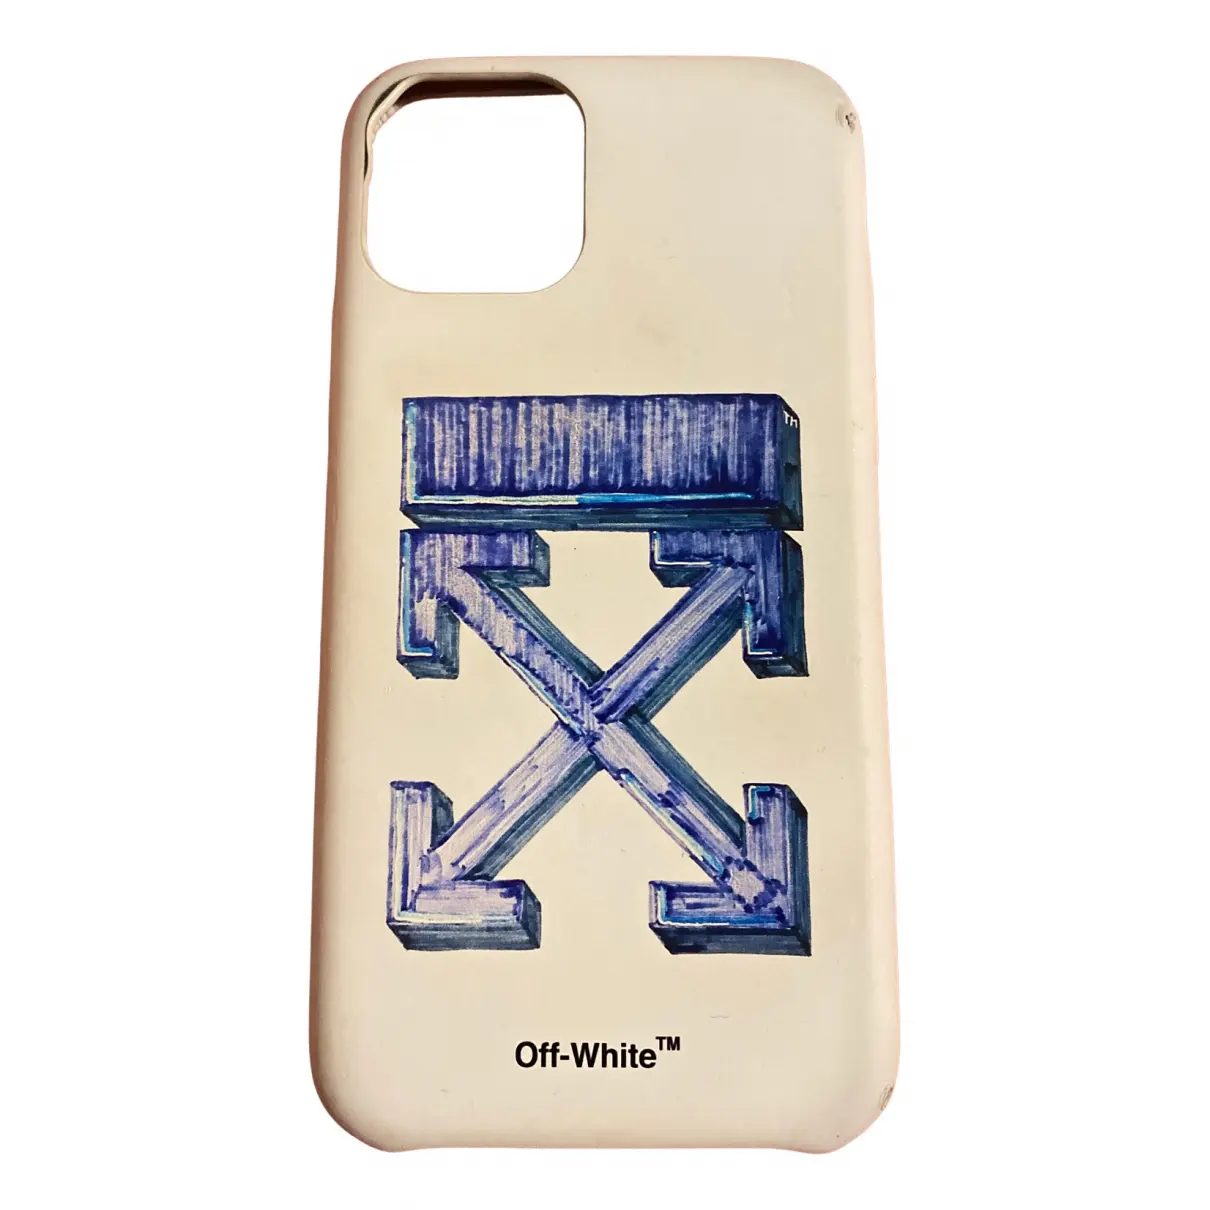 Iphone case Off-White